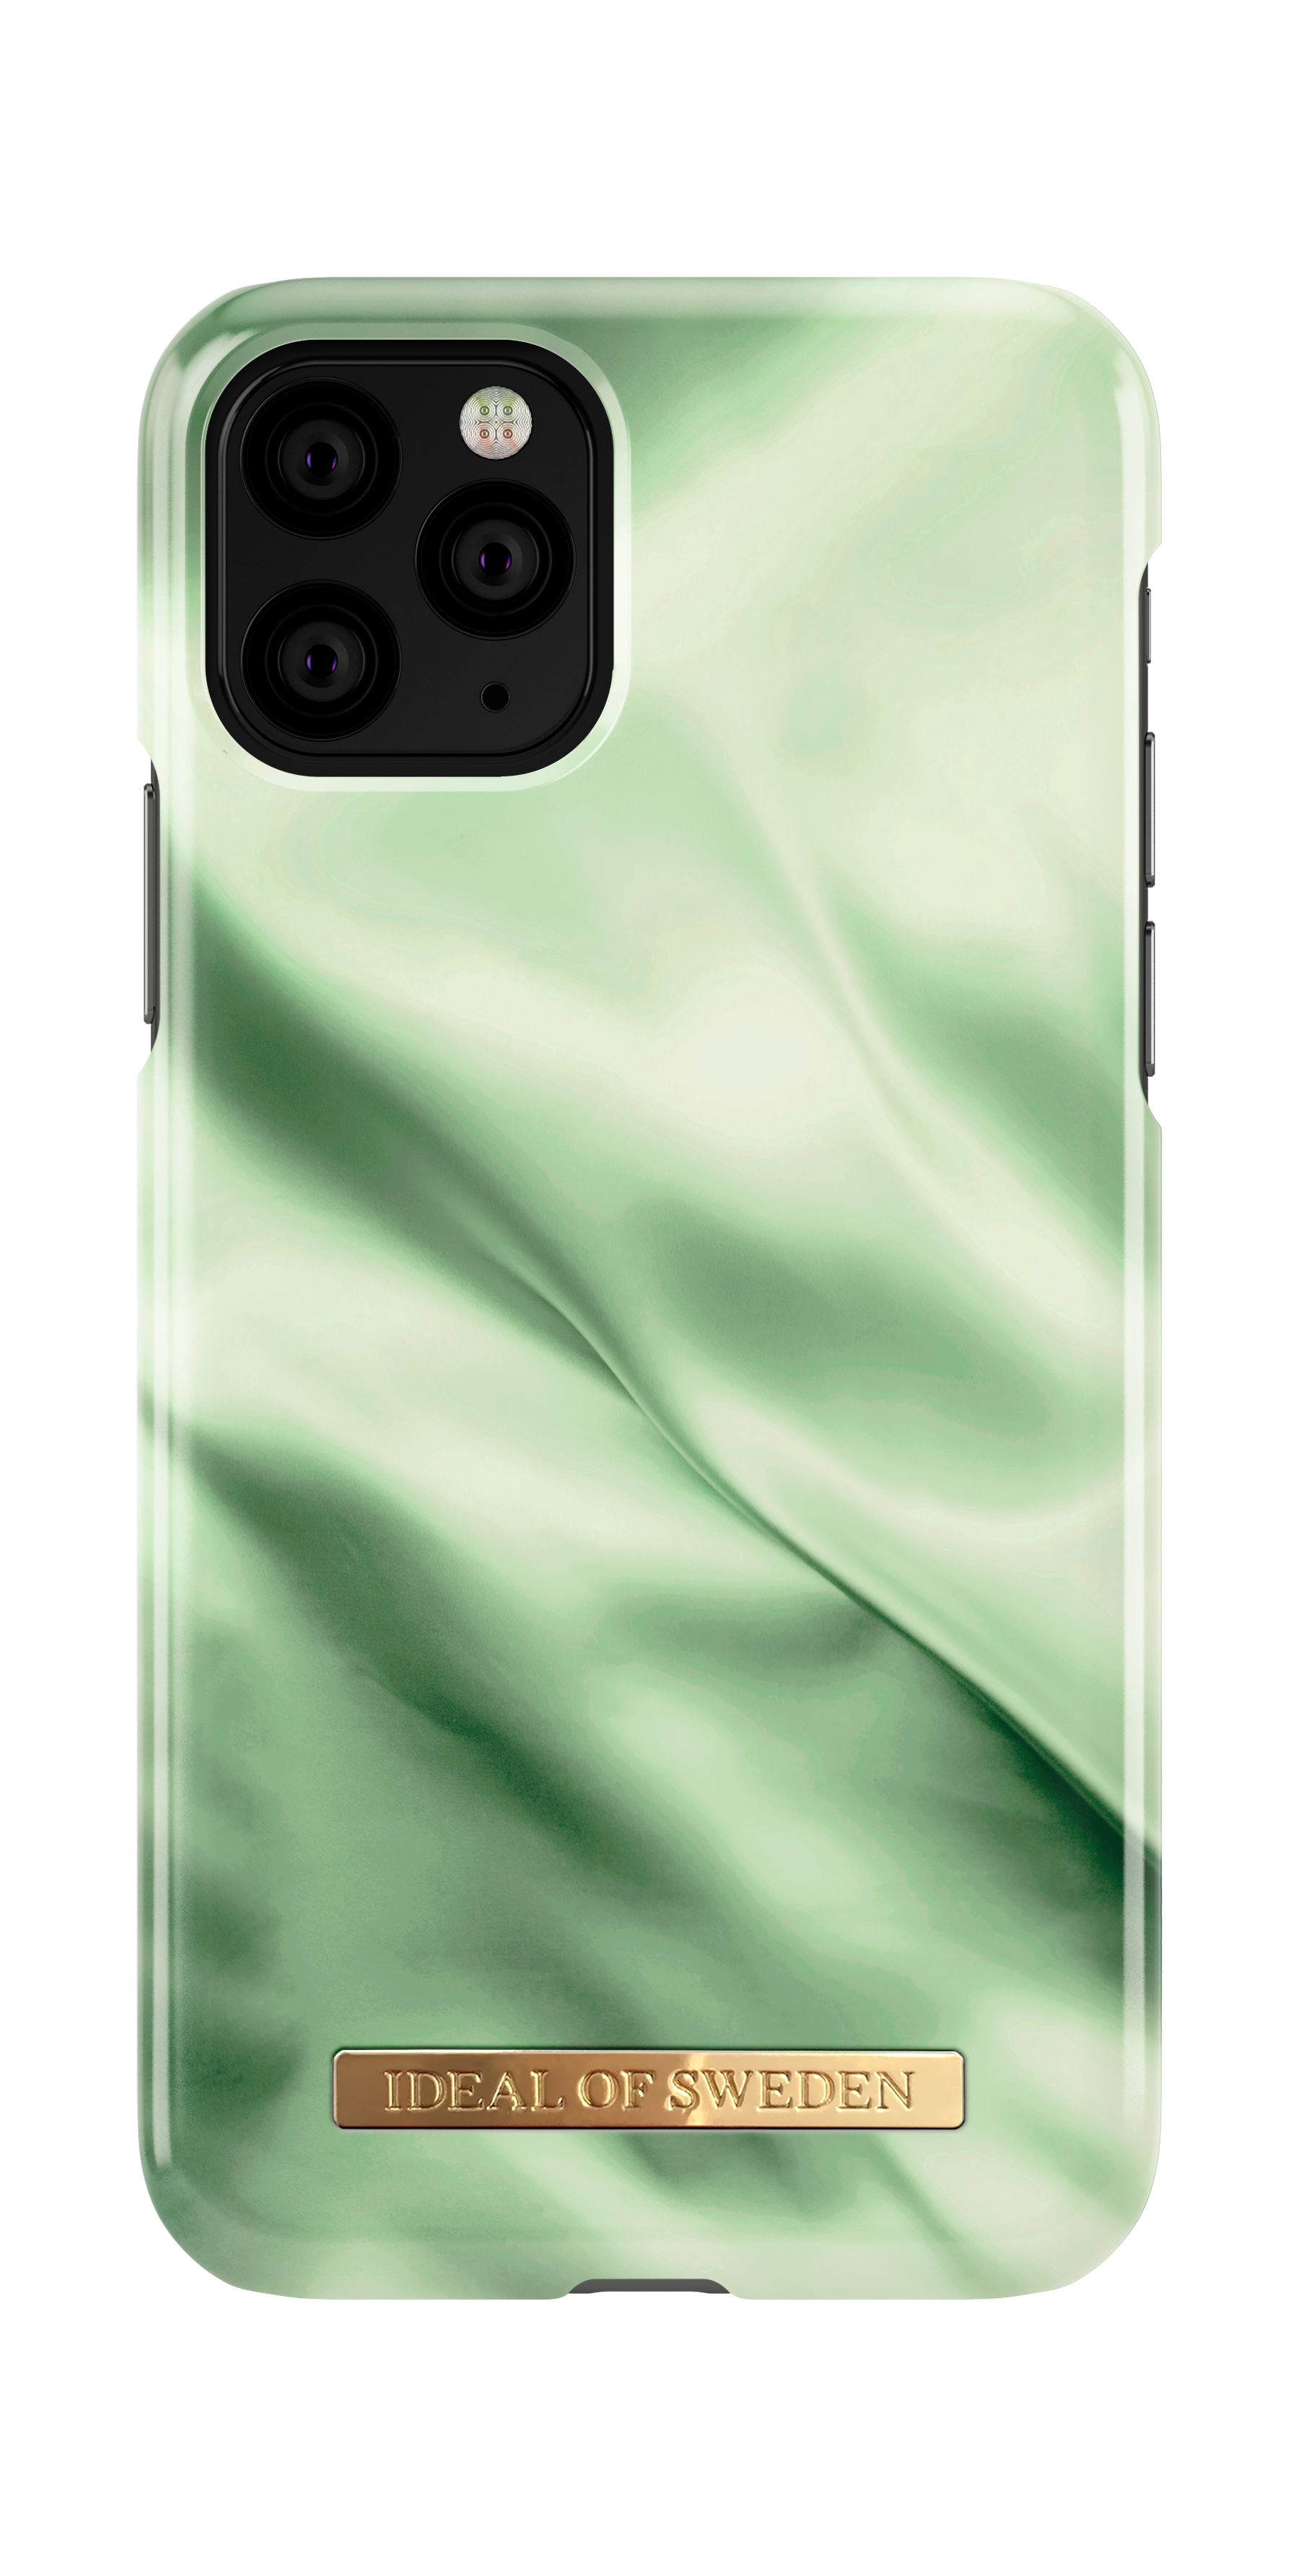 11 IDFCSC19-I1958-189, iPhone iPhone OF Pistachio iPhone SWEDEN Apple, Pro, X, Satin IDEAL Backcover, XS,